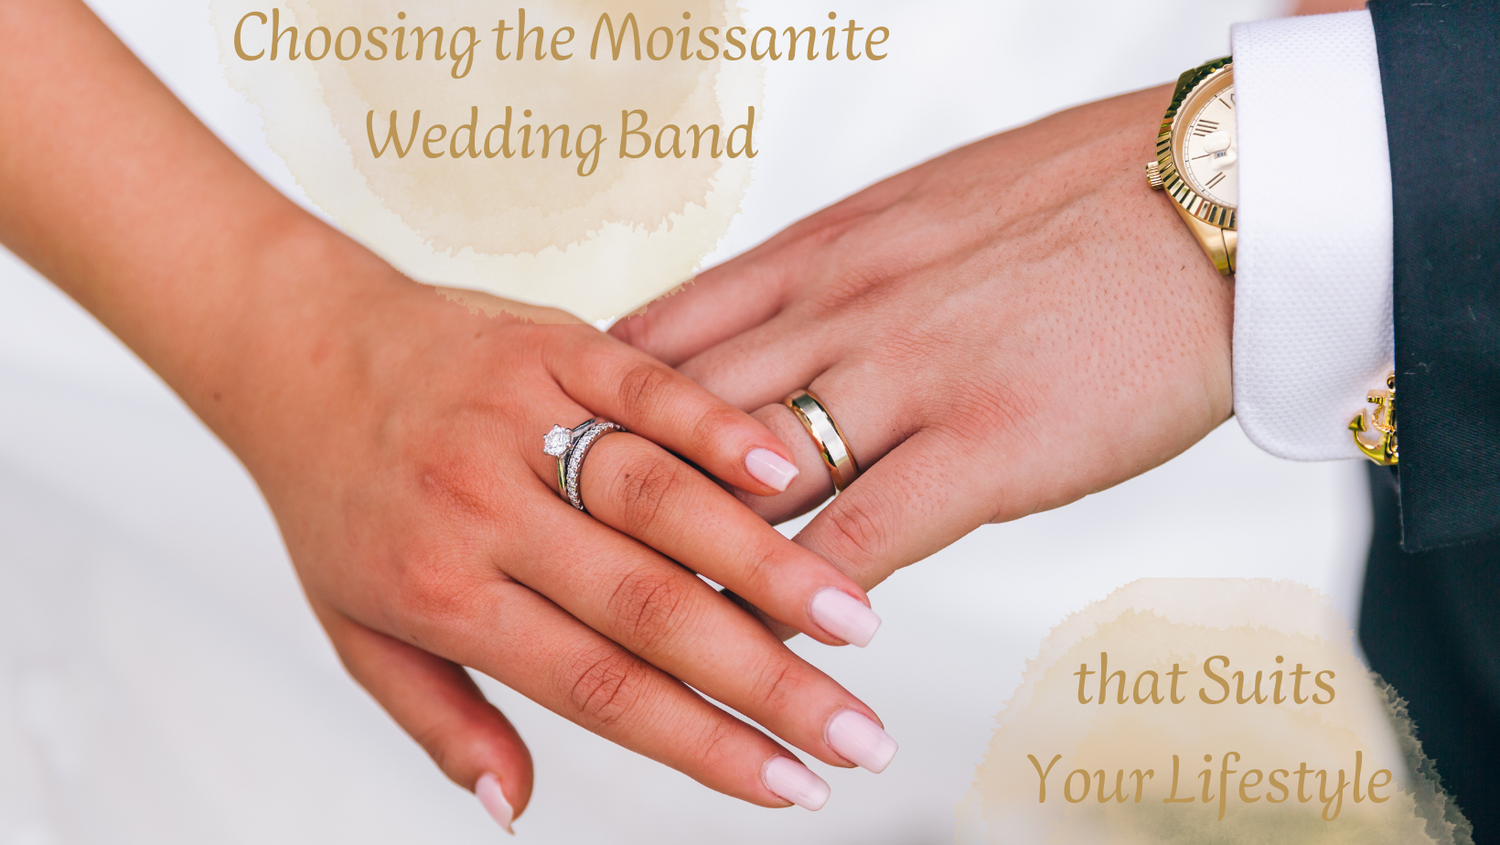 Four Tips for Choosing the Moissanite Wedding Band that Suits Your Lifestyle